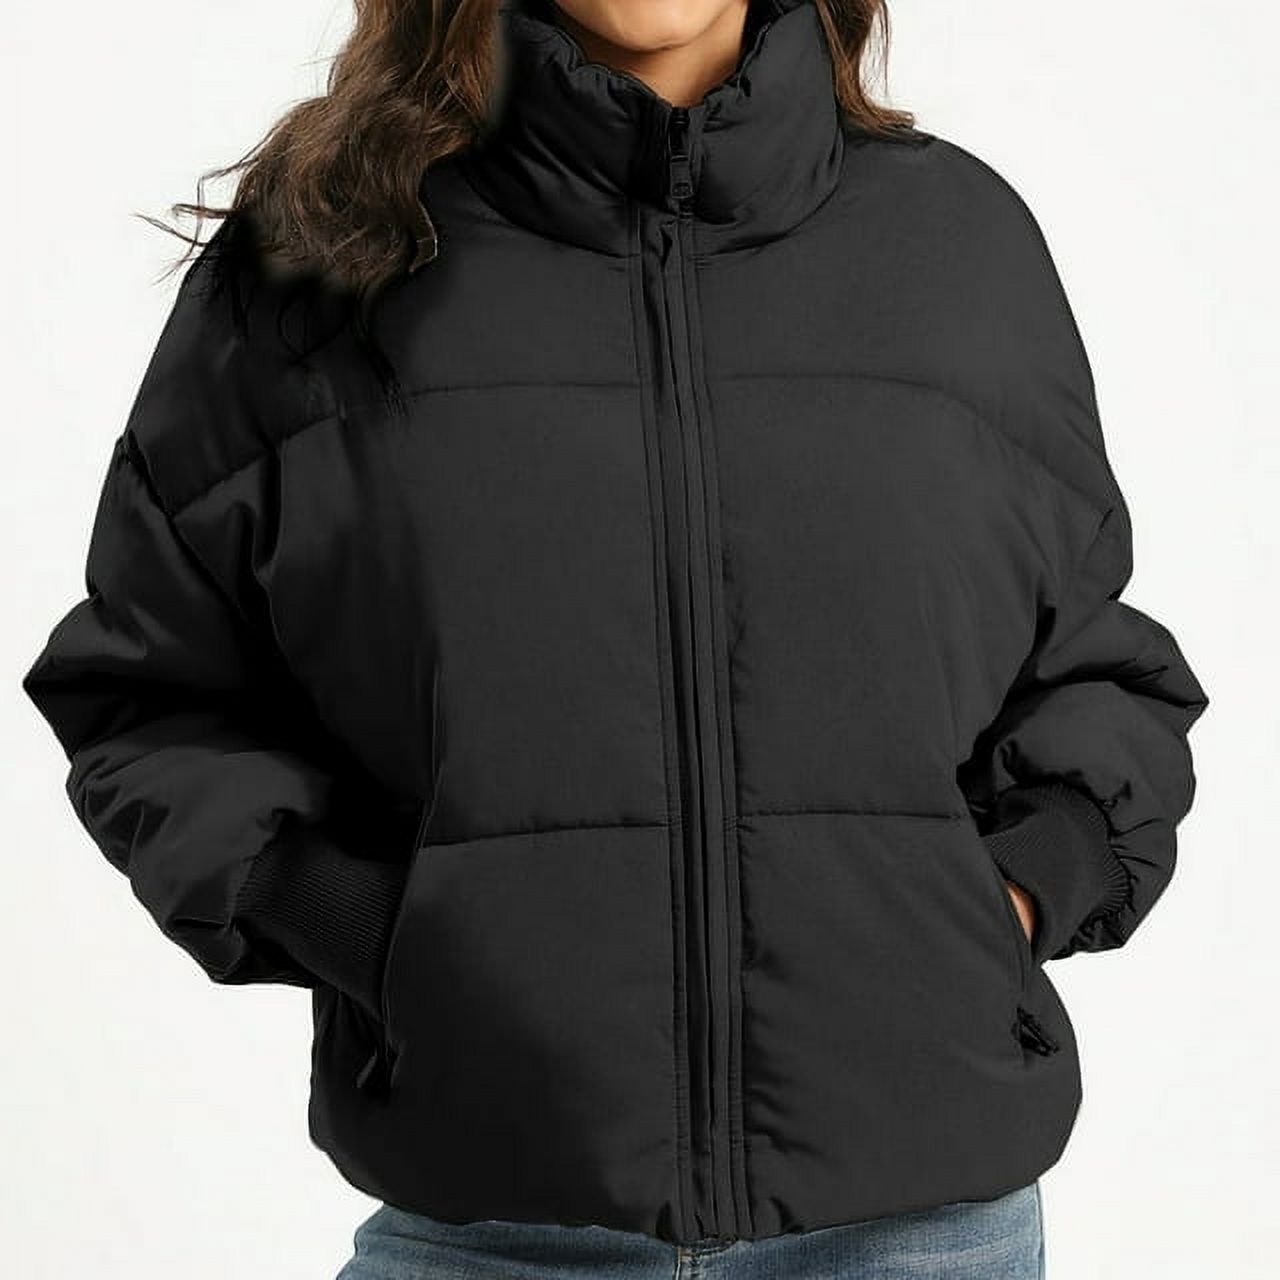 Movsou Women’s Cropped Puffer Jacket with Stand Collar - image 3 of 6